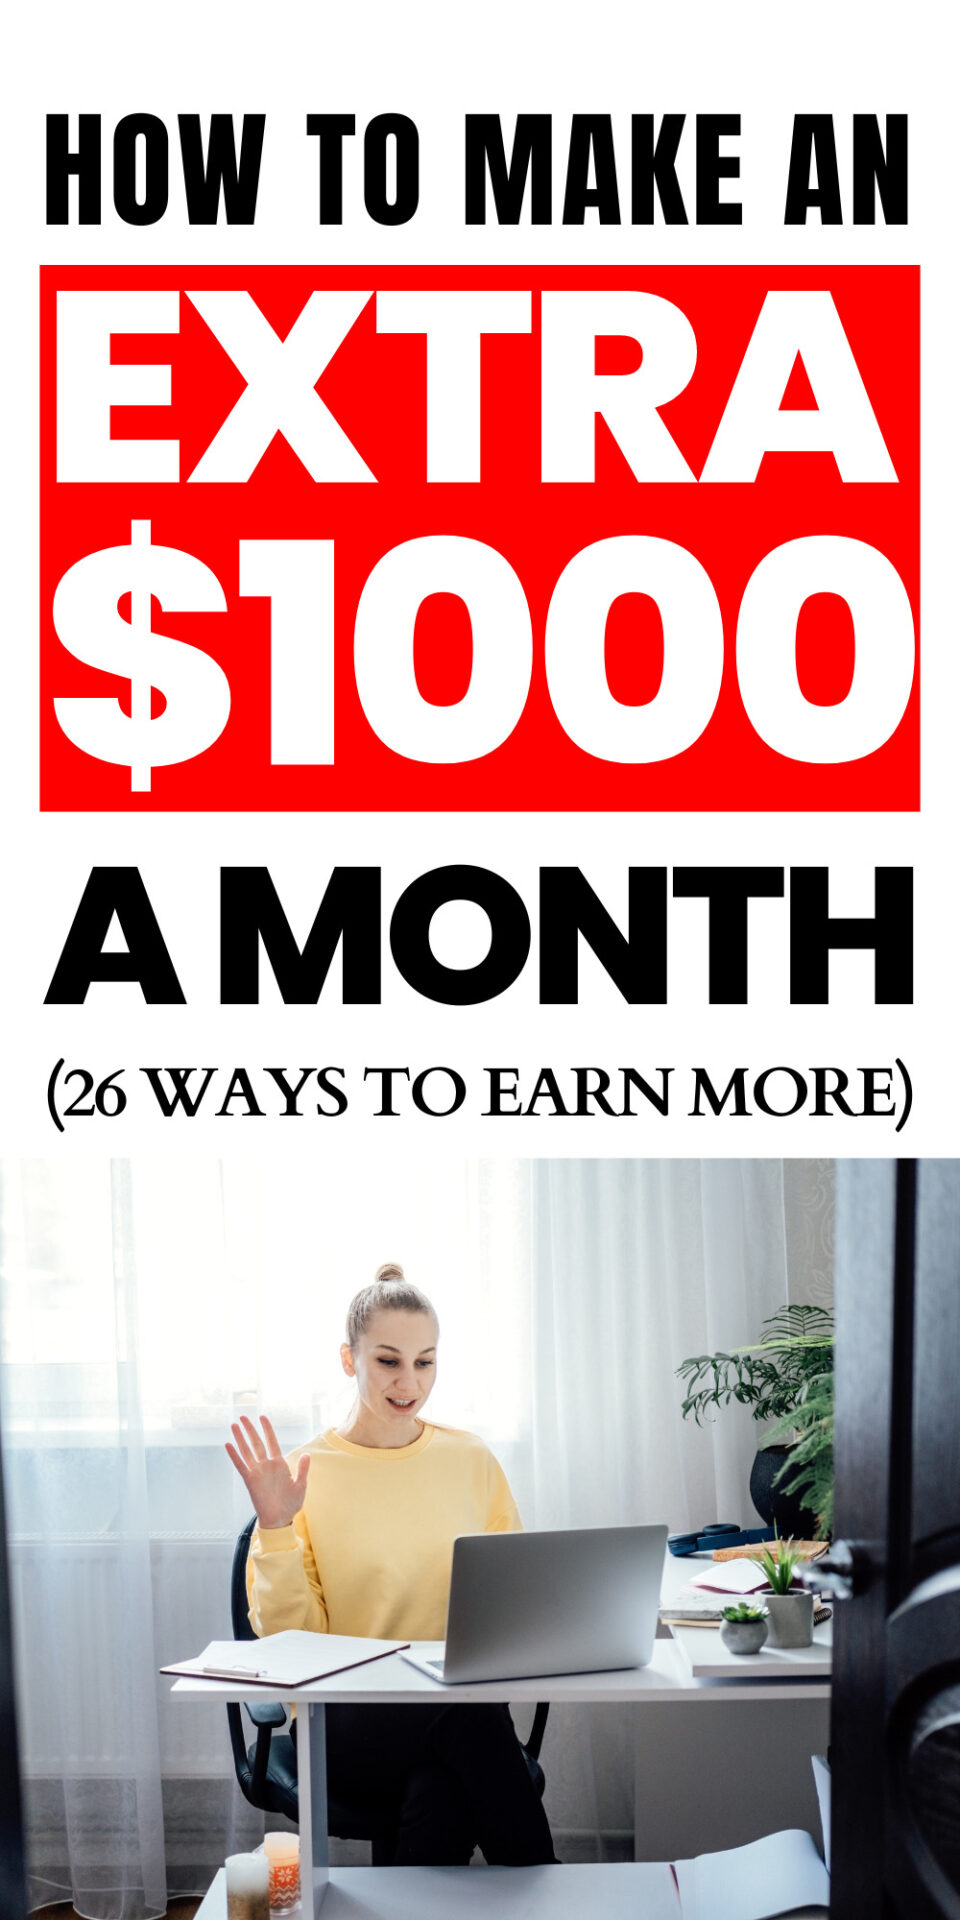 How to Make an Extra $1000 a Month